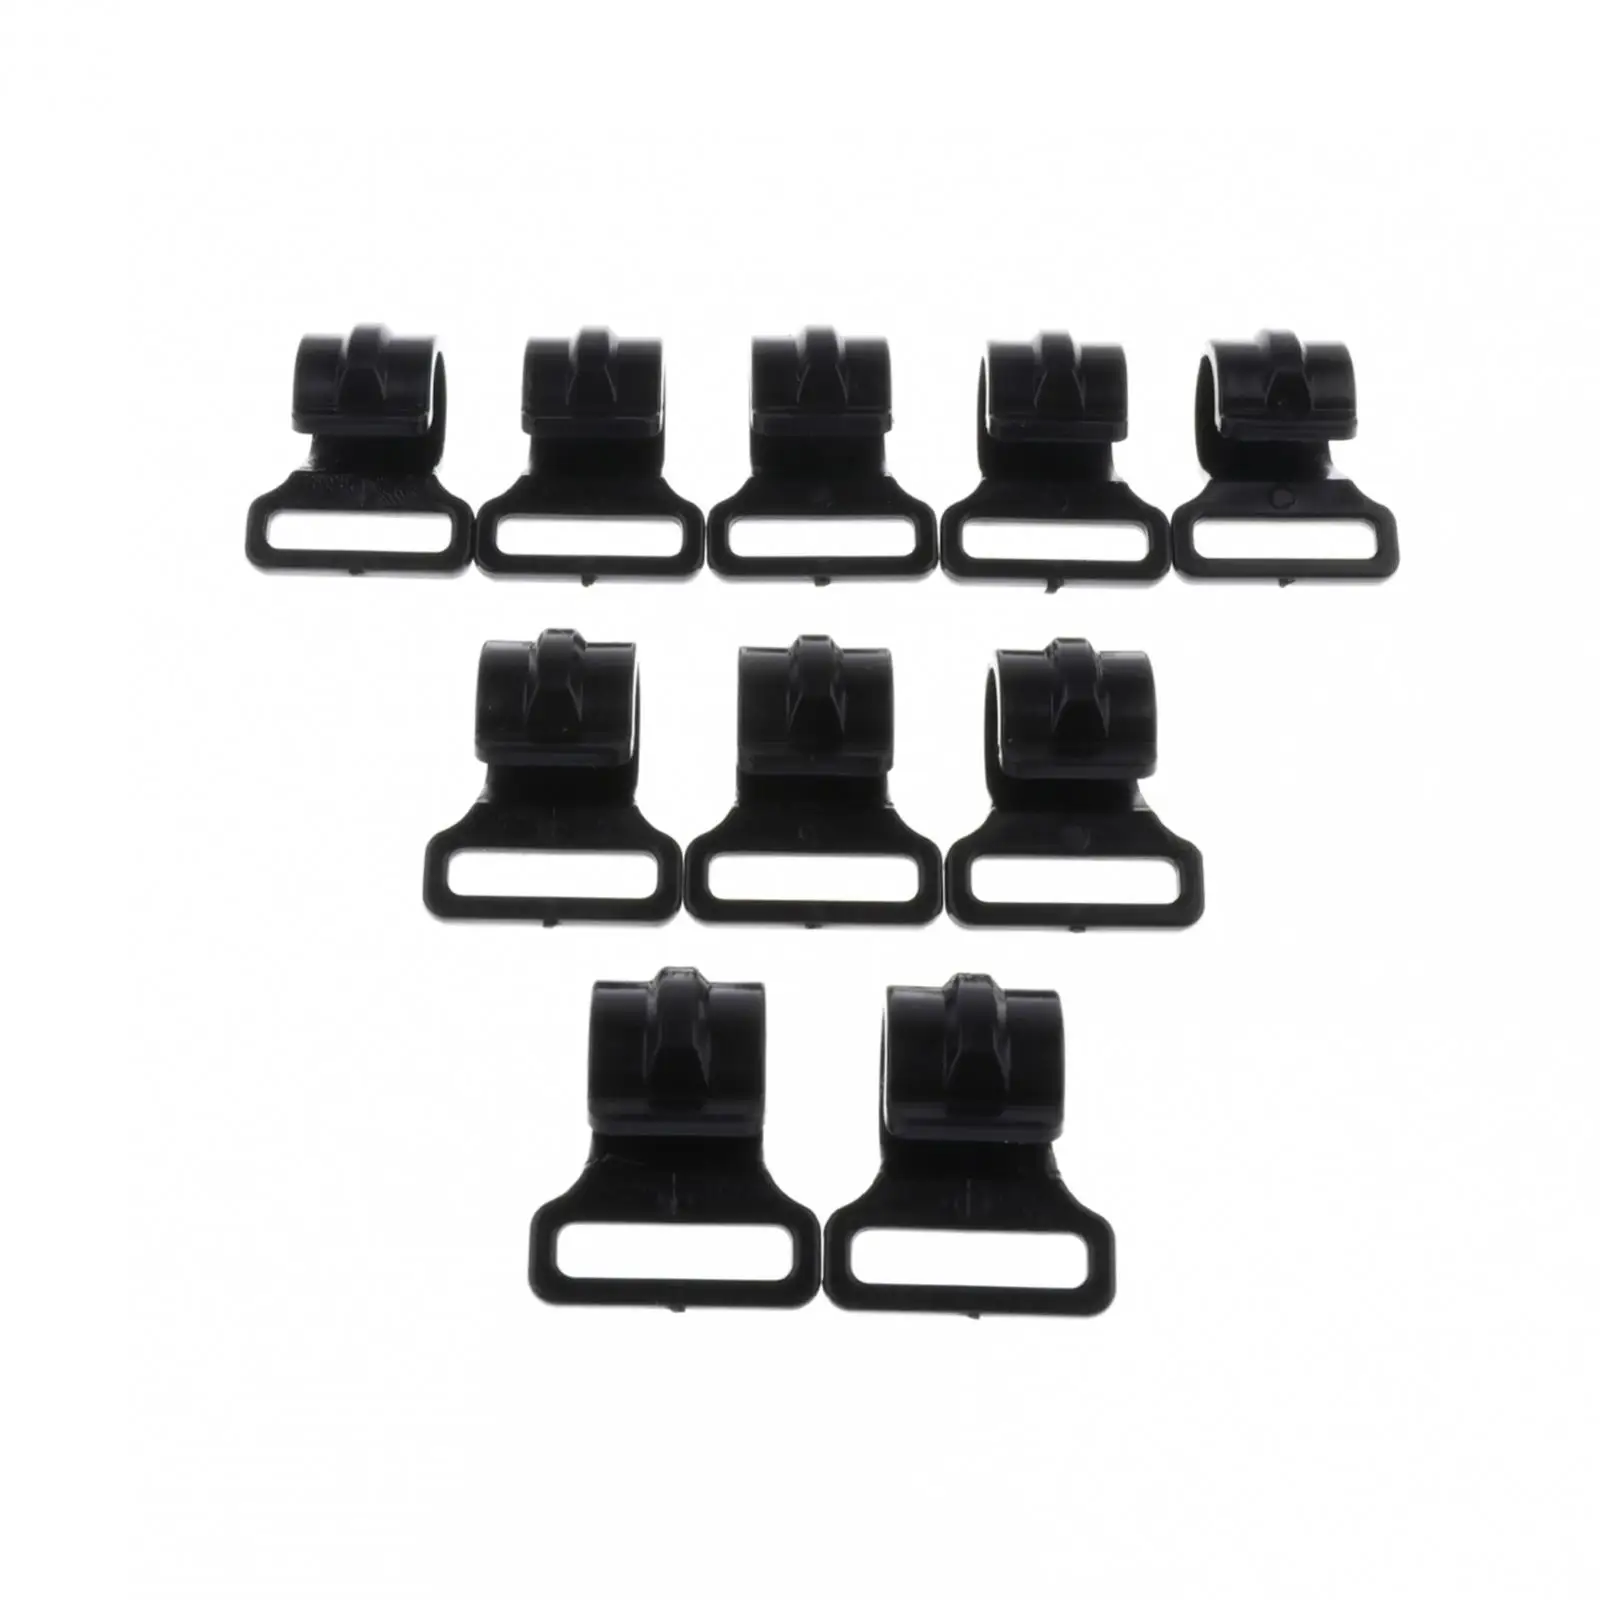 MagiDeal 10pcs Camping Tent Clips Accessories Outdoor Tent Hook Clamp Black 2.5cm